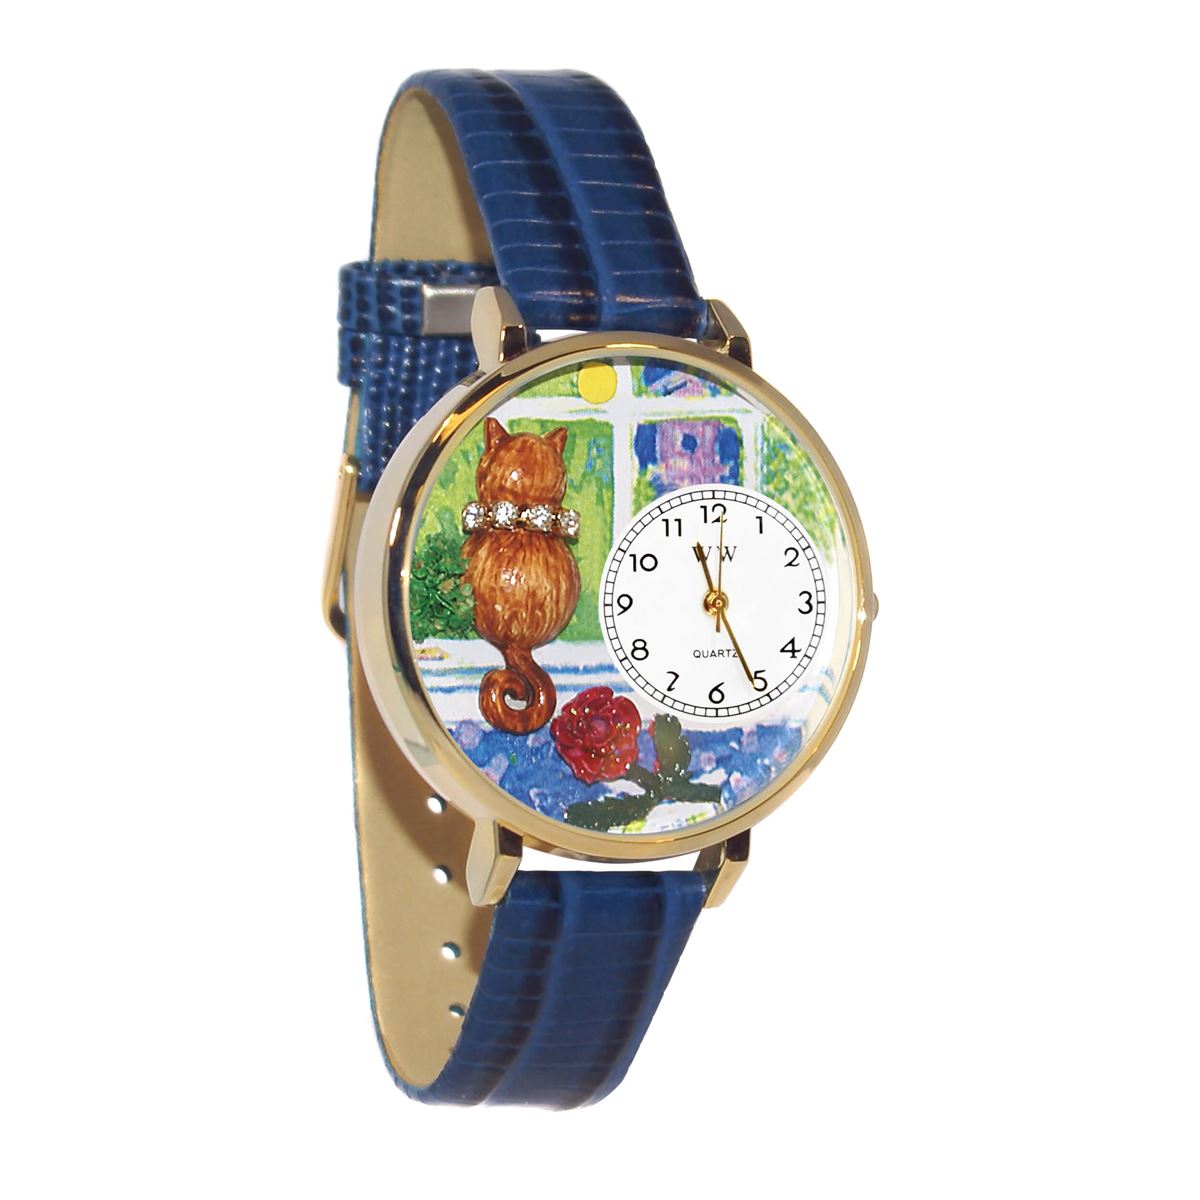 Whimsical Gifts | Aristo Cat 3D Watch Large Style | Handmade in USA | Animal Lover | Cat Lover | Novelty Unique Fun Miniatures Gift | Gold Finish Royal Blue Leather Watch Band